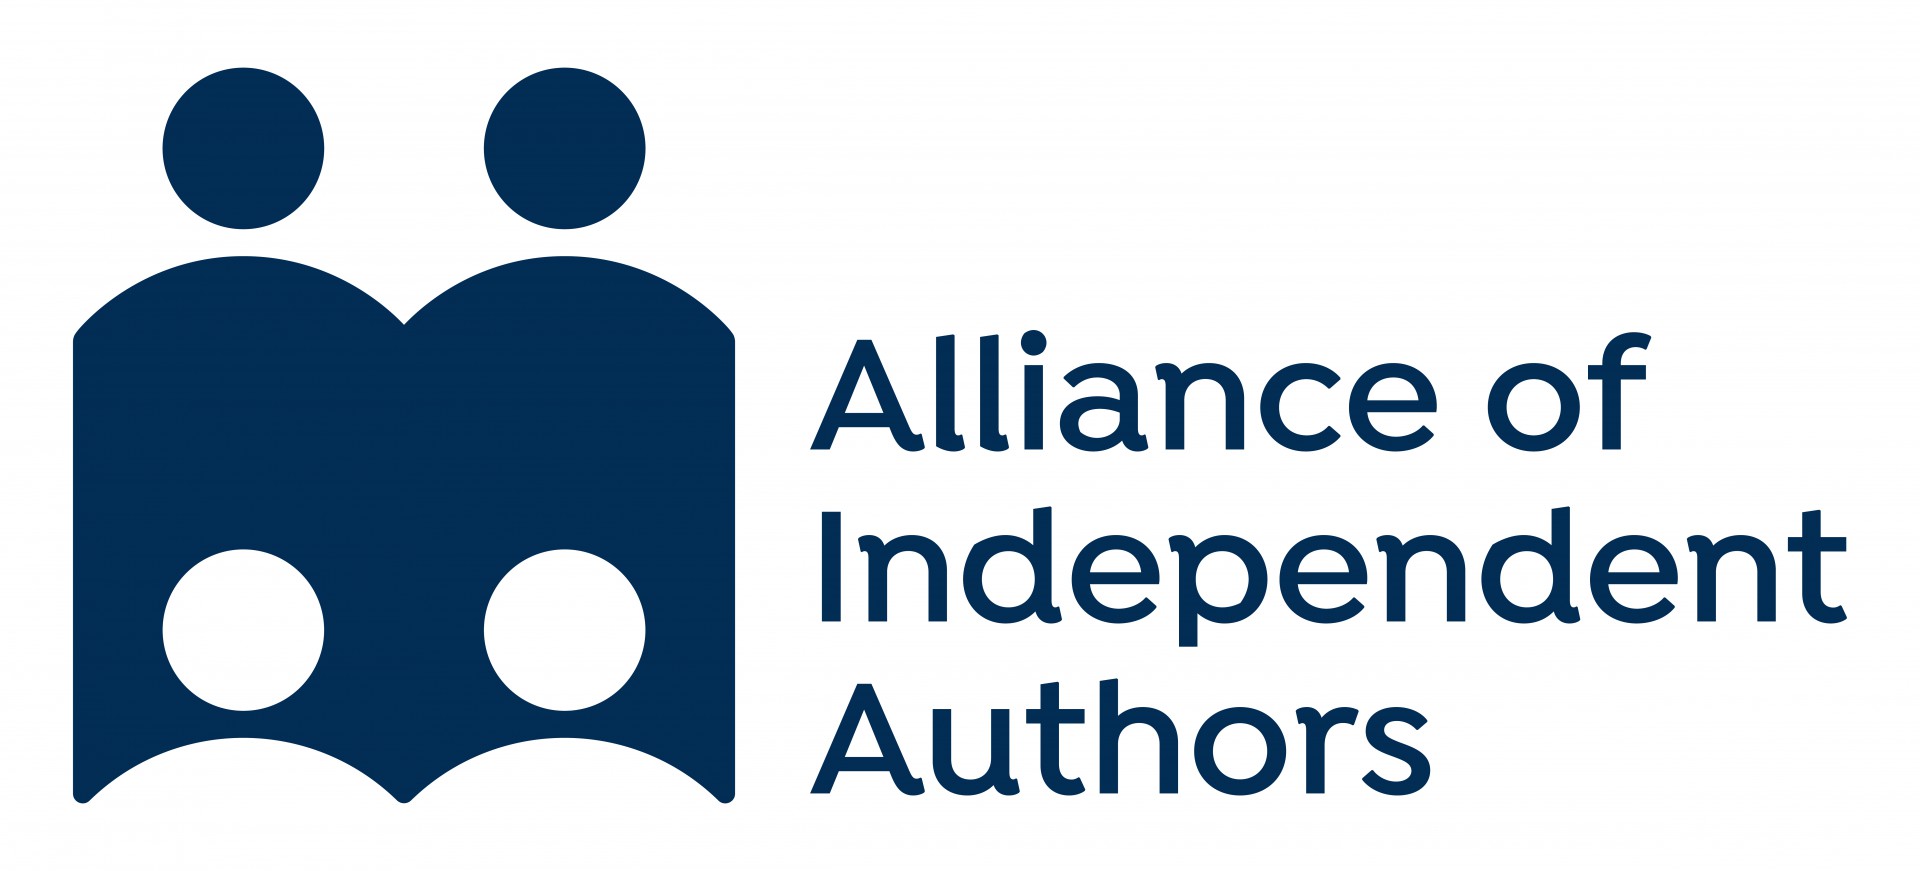 Media Release: Alliance Of Independent Authors To Partner With The Ethan Ellenberg Literary Agency